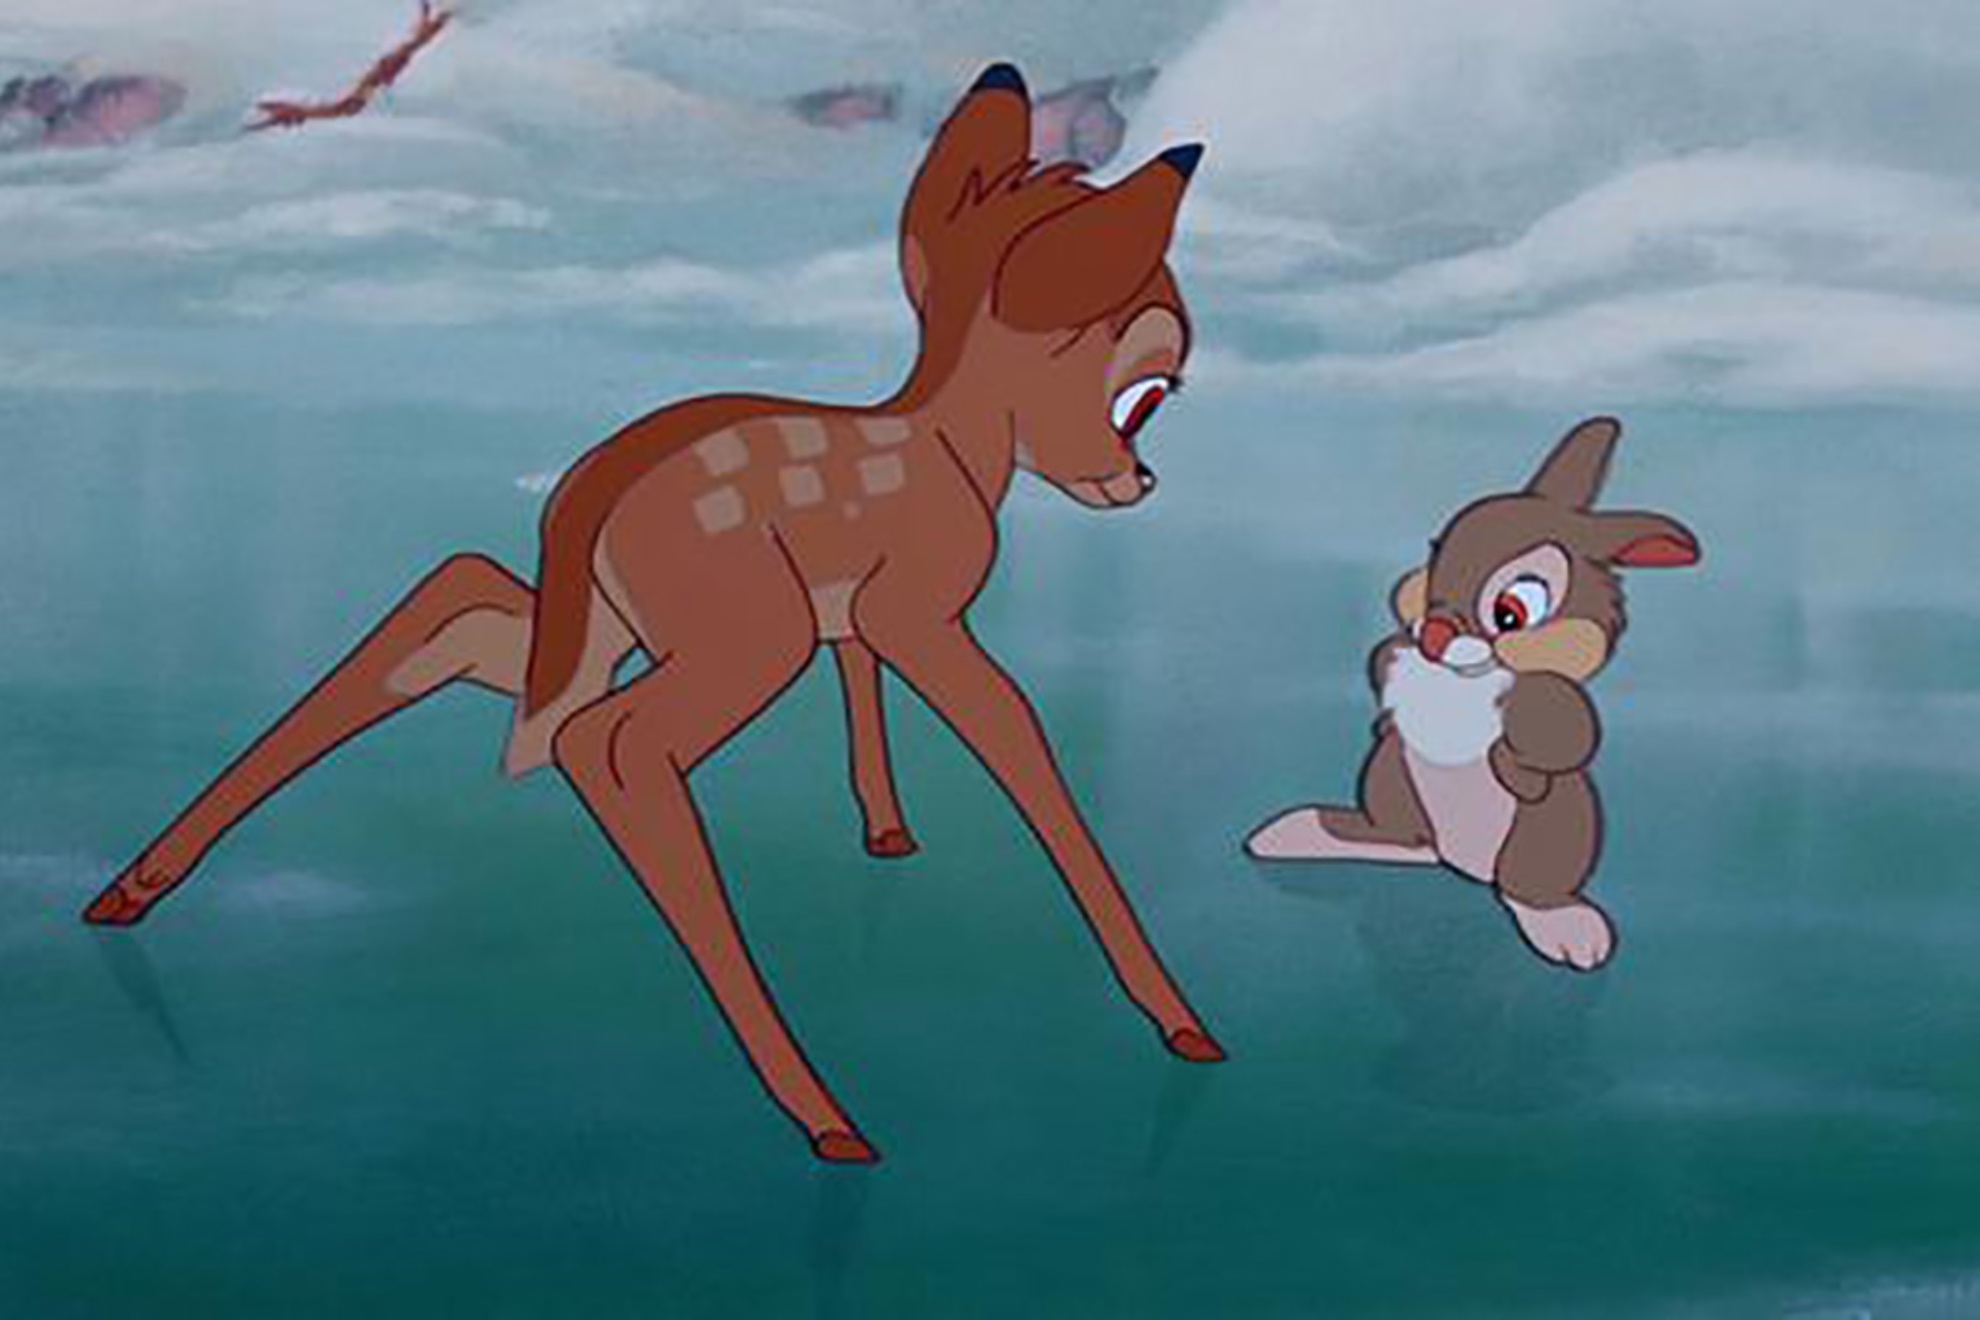 Bambi' screenwriter wants to remove famous scene: I don't want to spoil the  plot, but